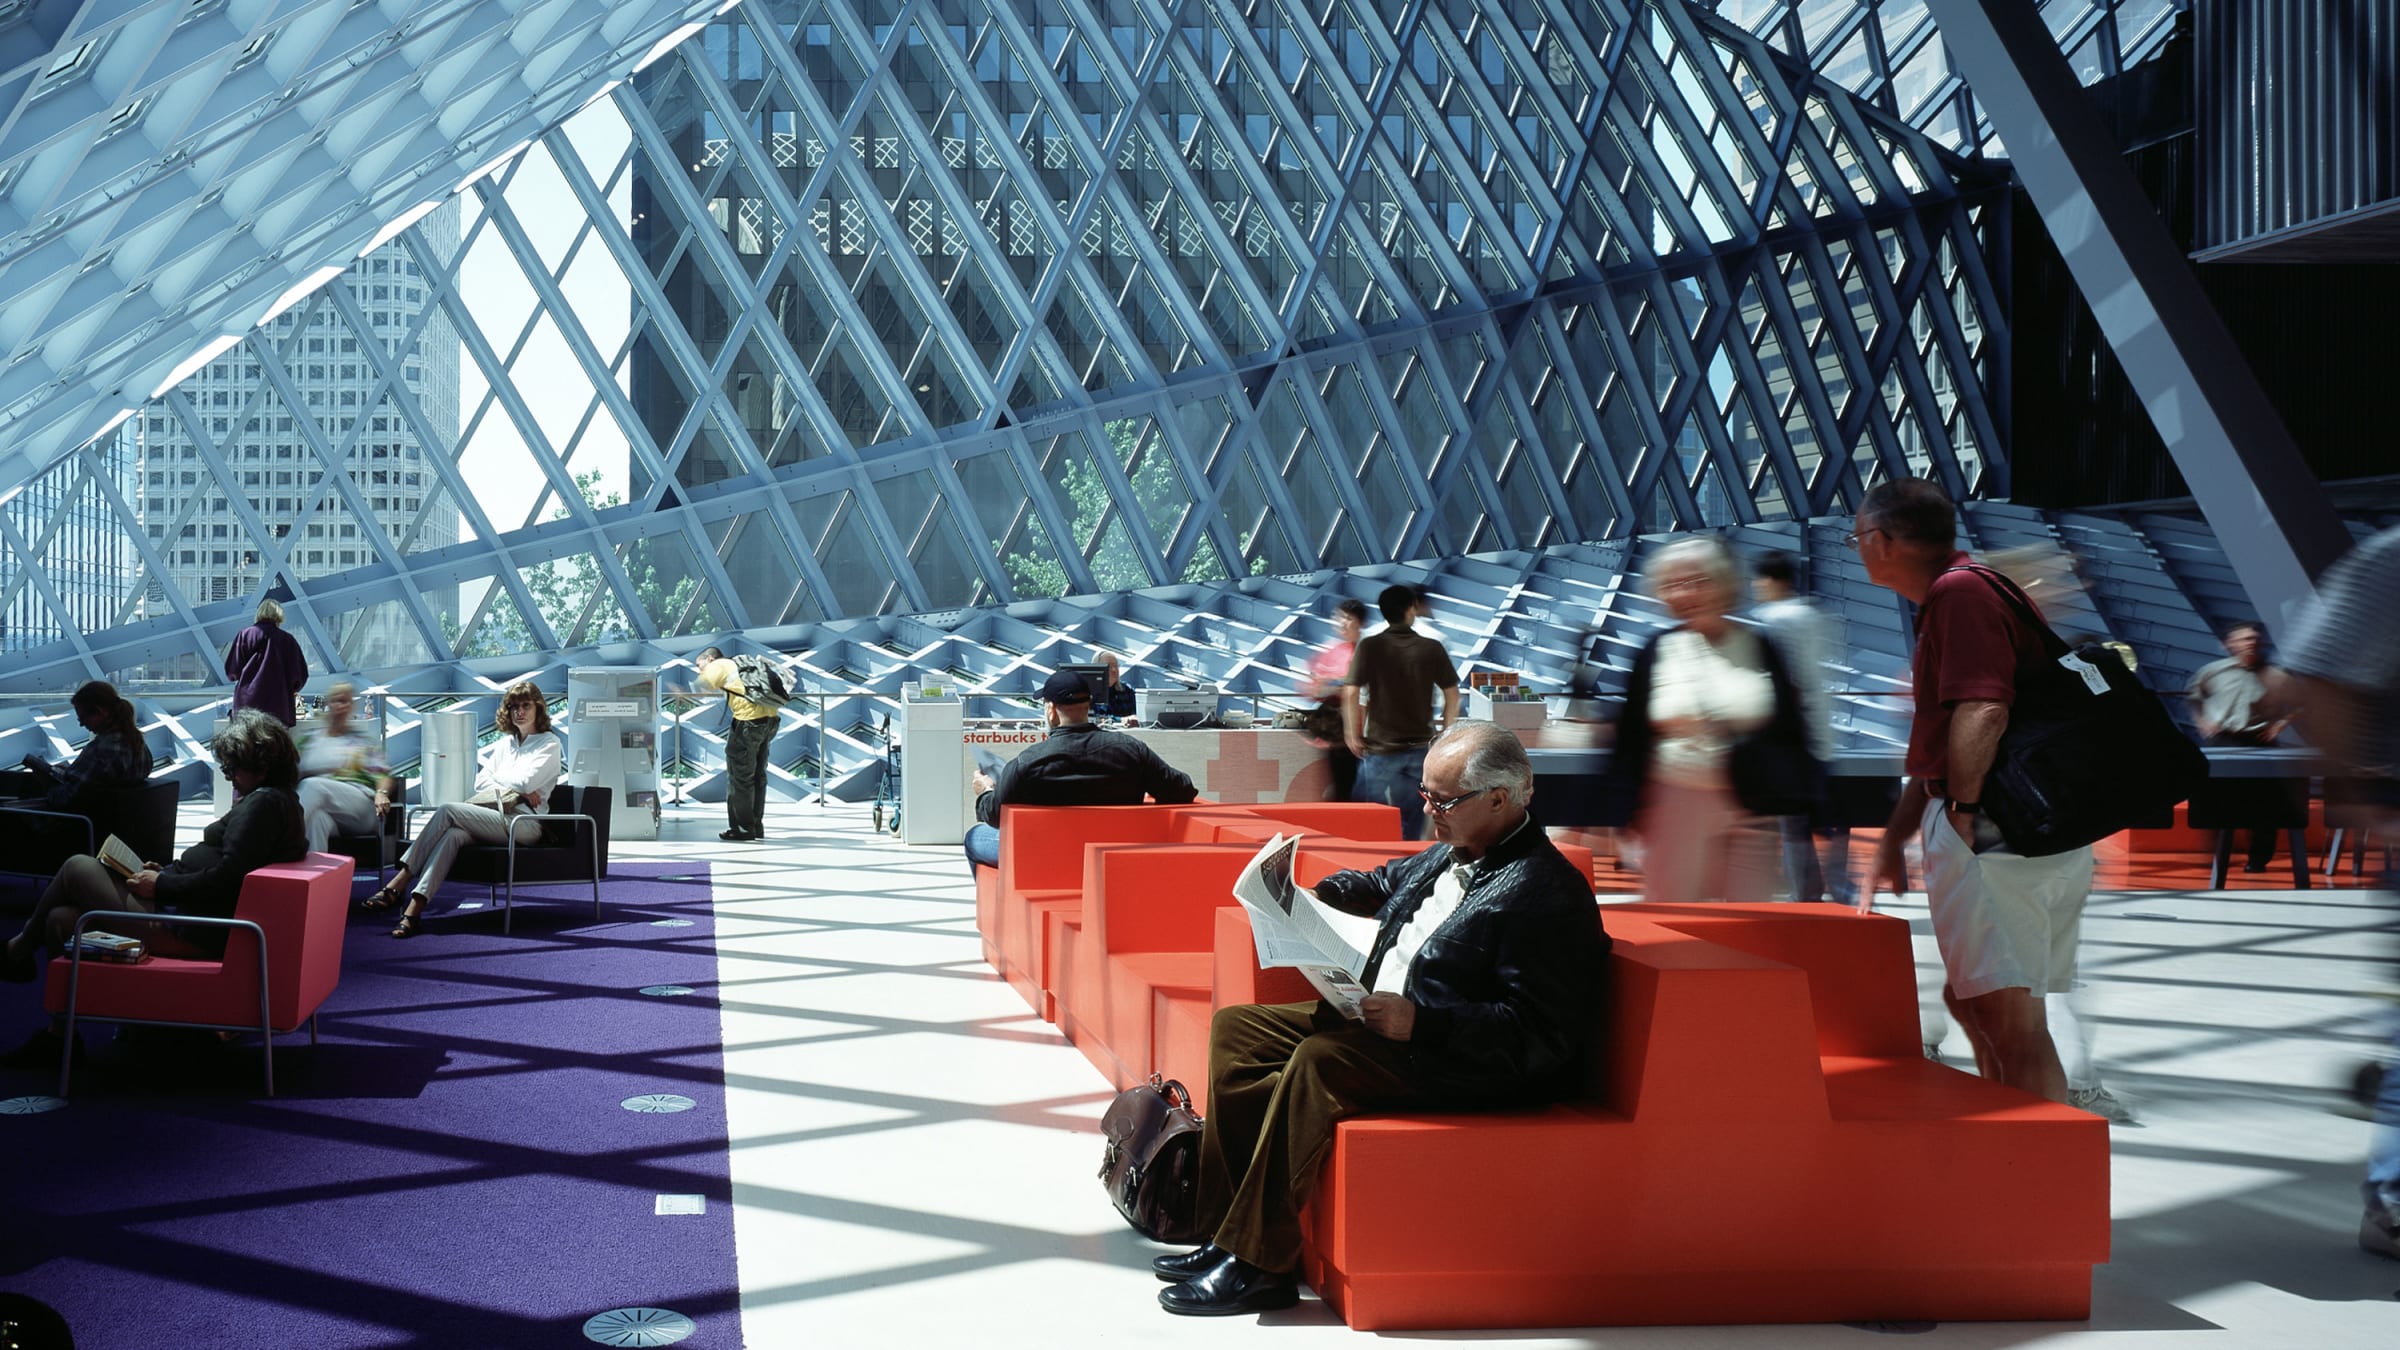 Seattle Central Library Is the Height of Whimsy